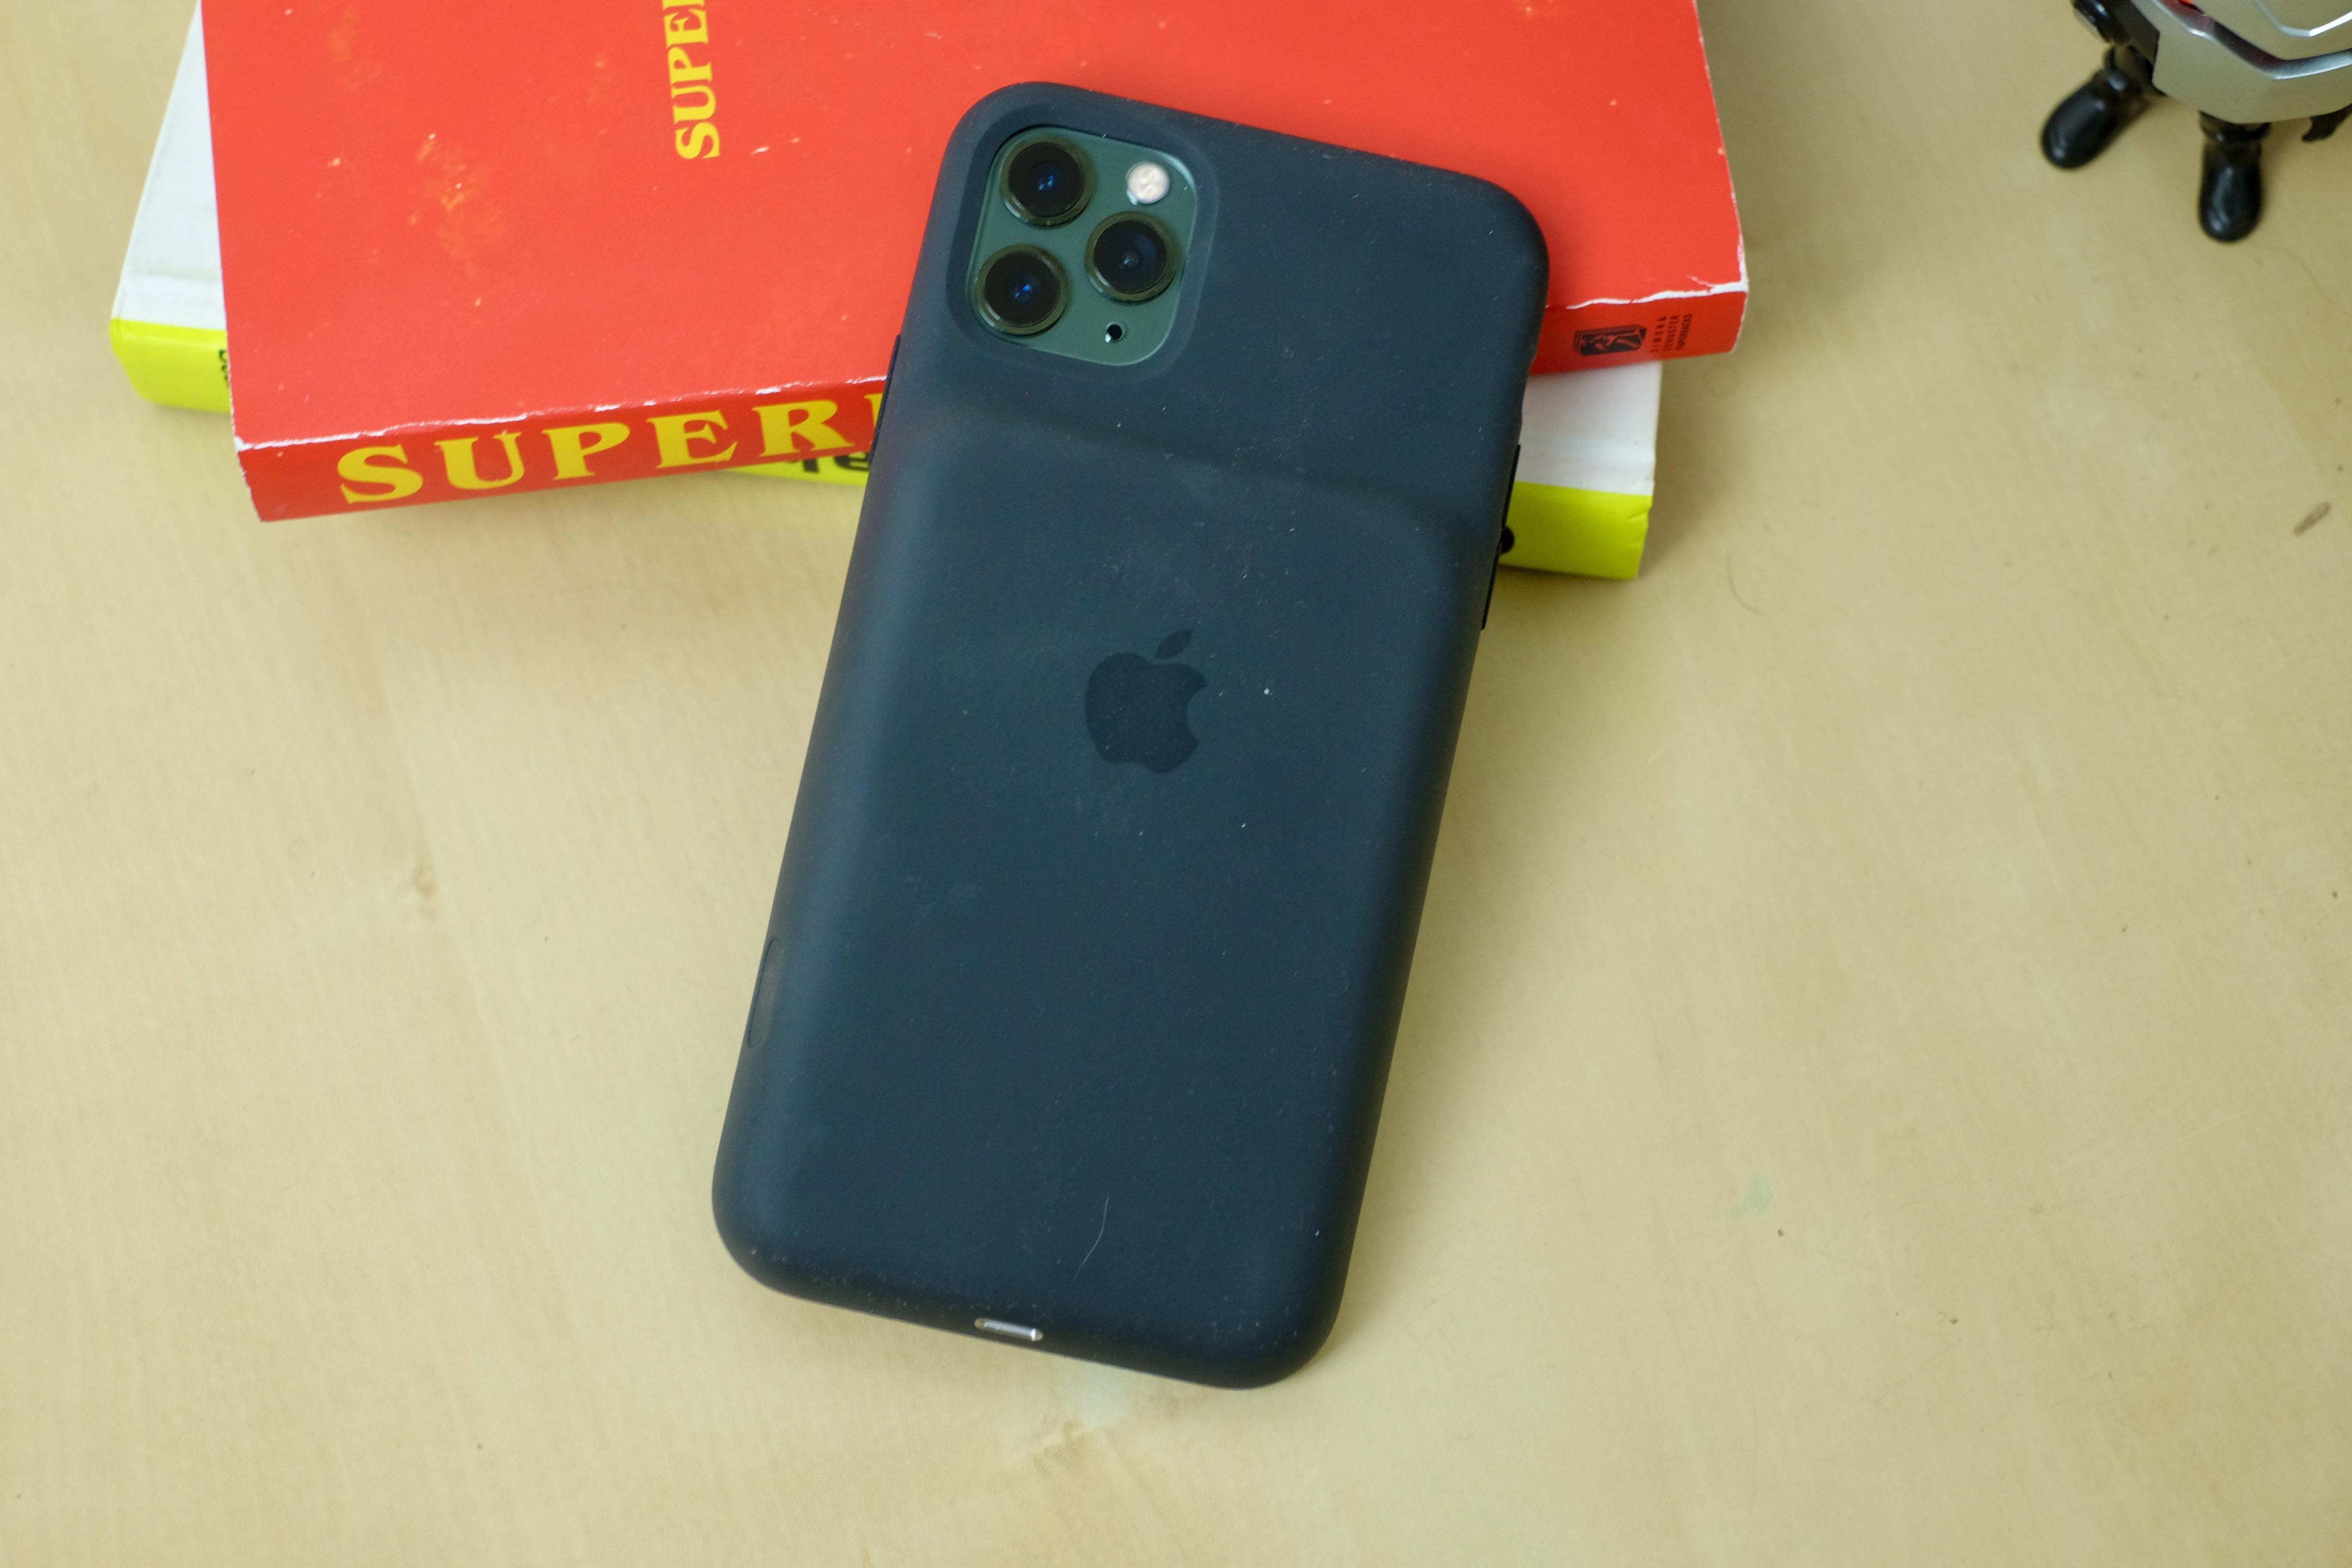 Apple's iPhone Smart Battery Case This battery case proves useful in more ways than one | ZDNET